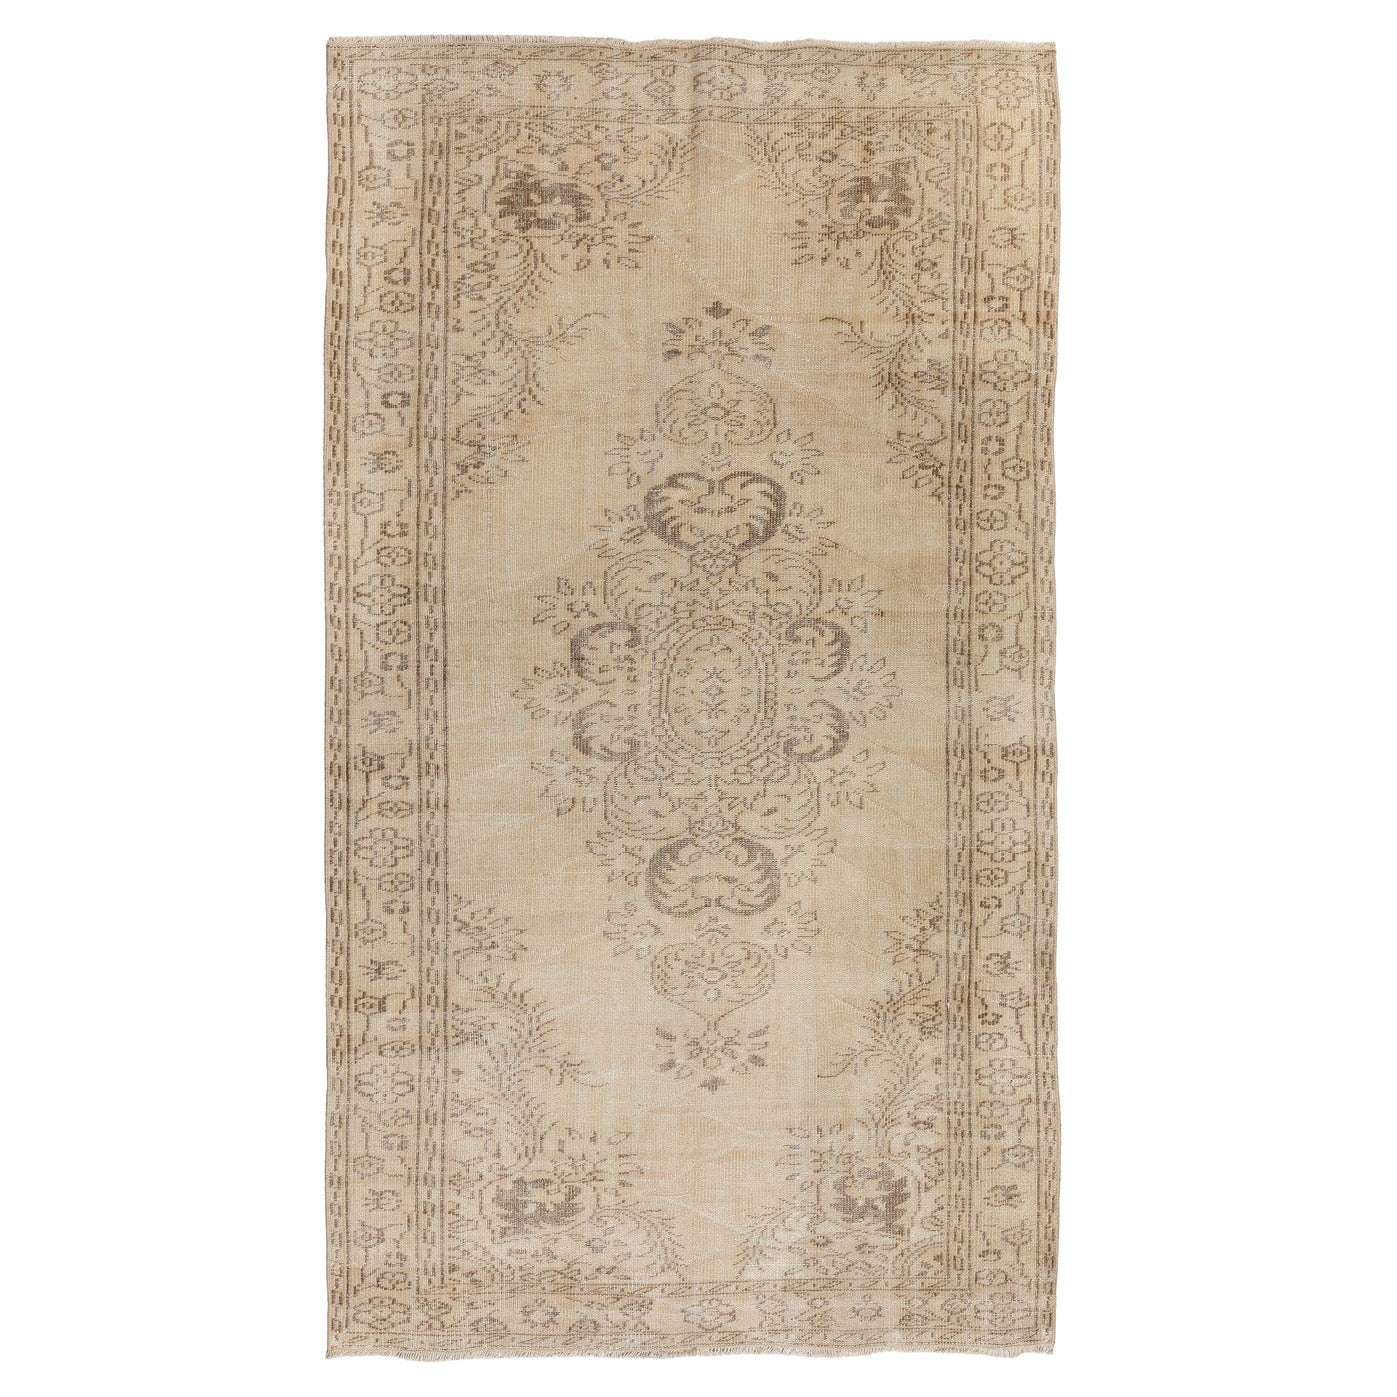 5.3x9.2 Ft Handmade Vintage Area Rug in Neutral Colors, Faded Anatolian Carpet (tapis anatolien délavé)